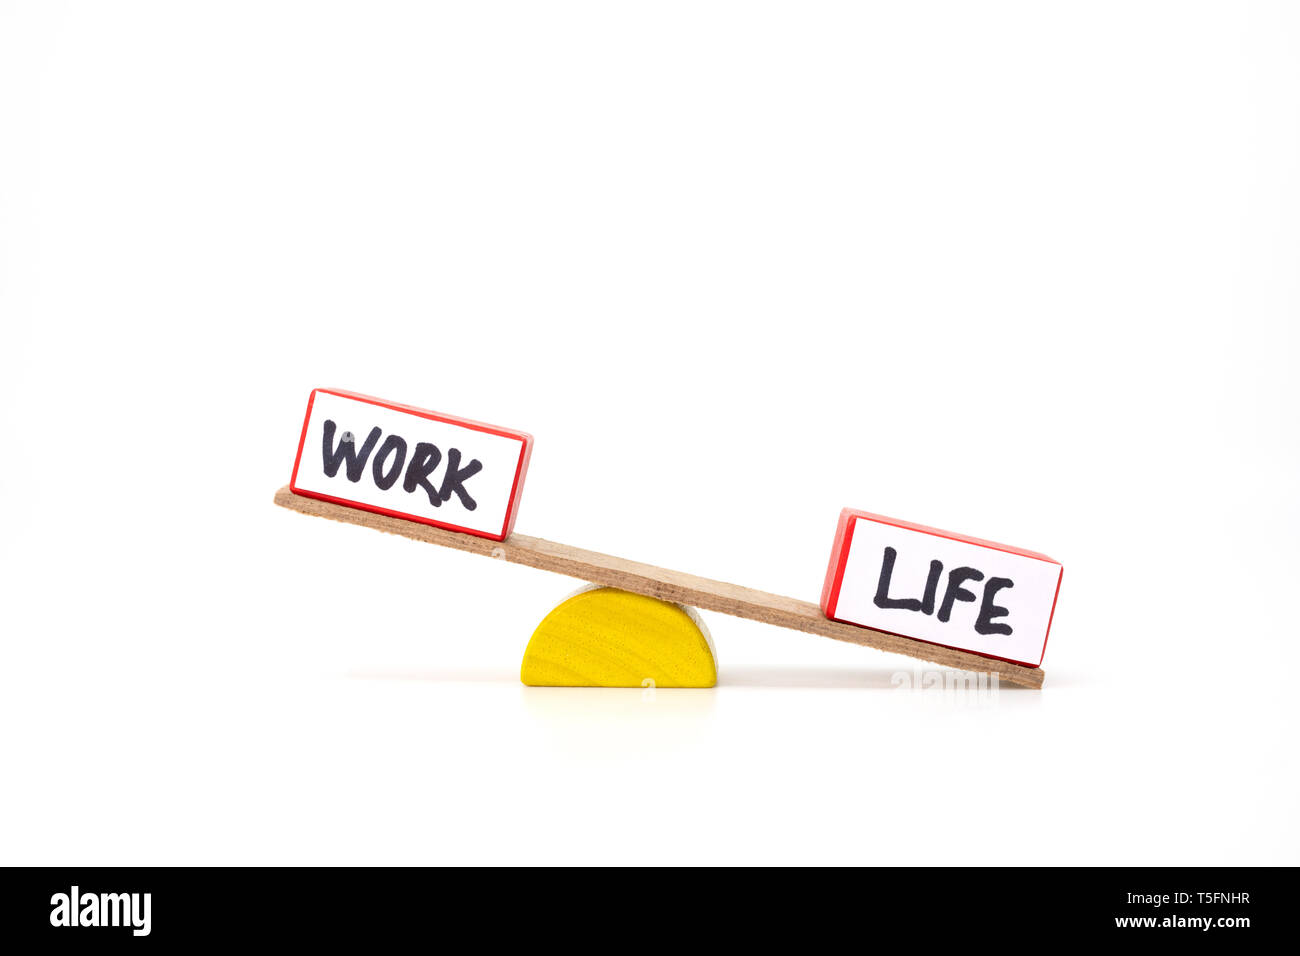 Work life balance concept with two blocks representing work and life Stock Photo